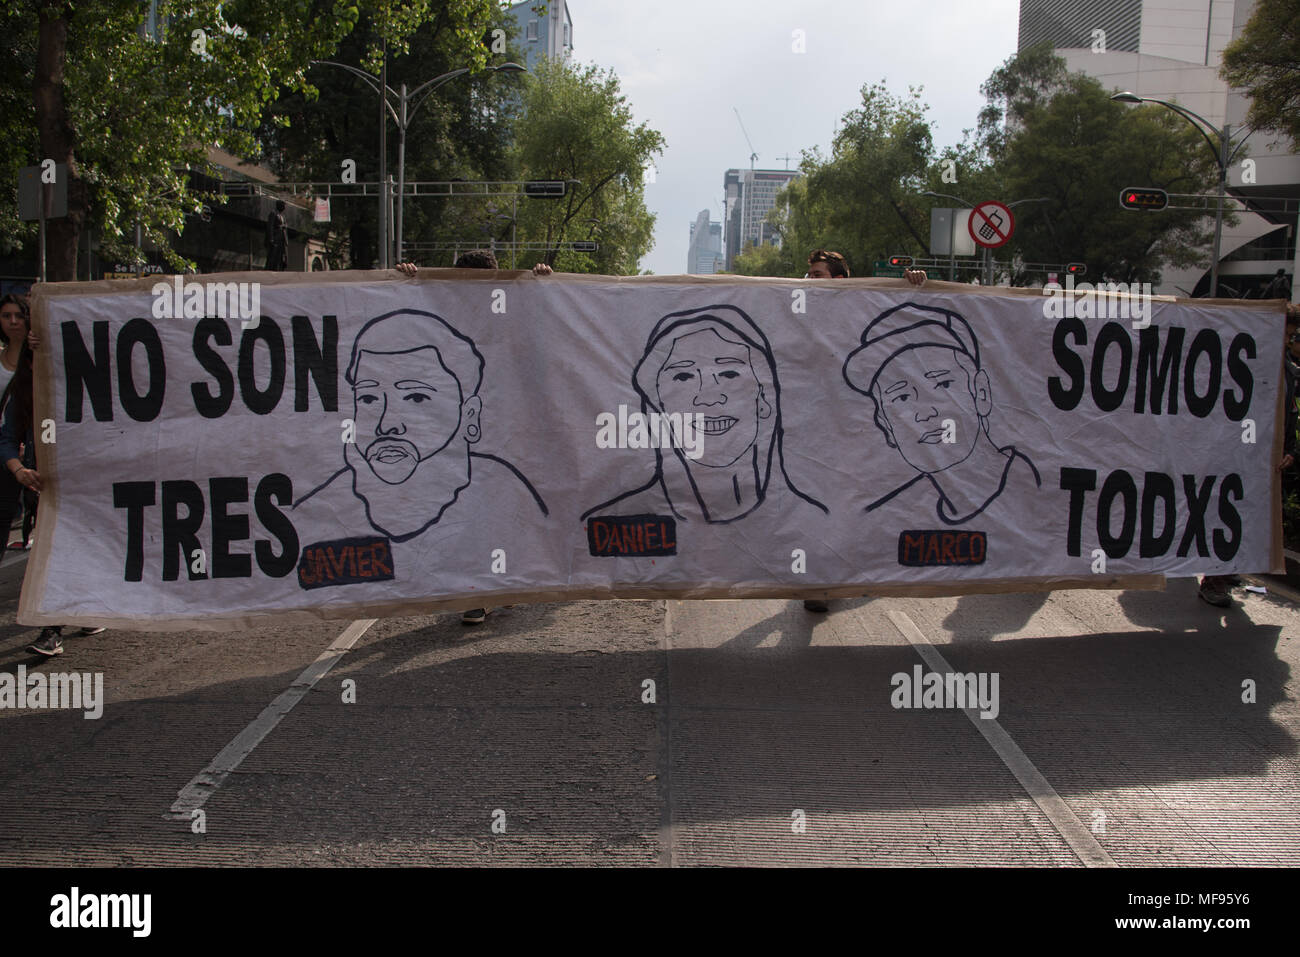 Mexico City, Mexico. 24th April, 2018.  Hundreds of students rallied in Mexico City to ask for justice in the case of the killing of three film students in Guadalajara, Mexico. The banner reads 'No son tres, somos todxs' ('It is not three , it is everyone'). Credit: Miguel A. Aguilar-Mancera/Alamy Live News Stock Photo